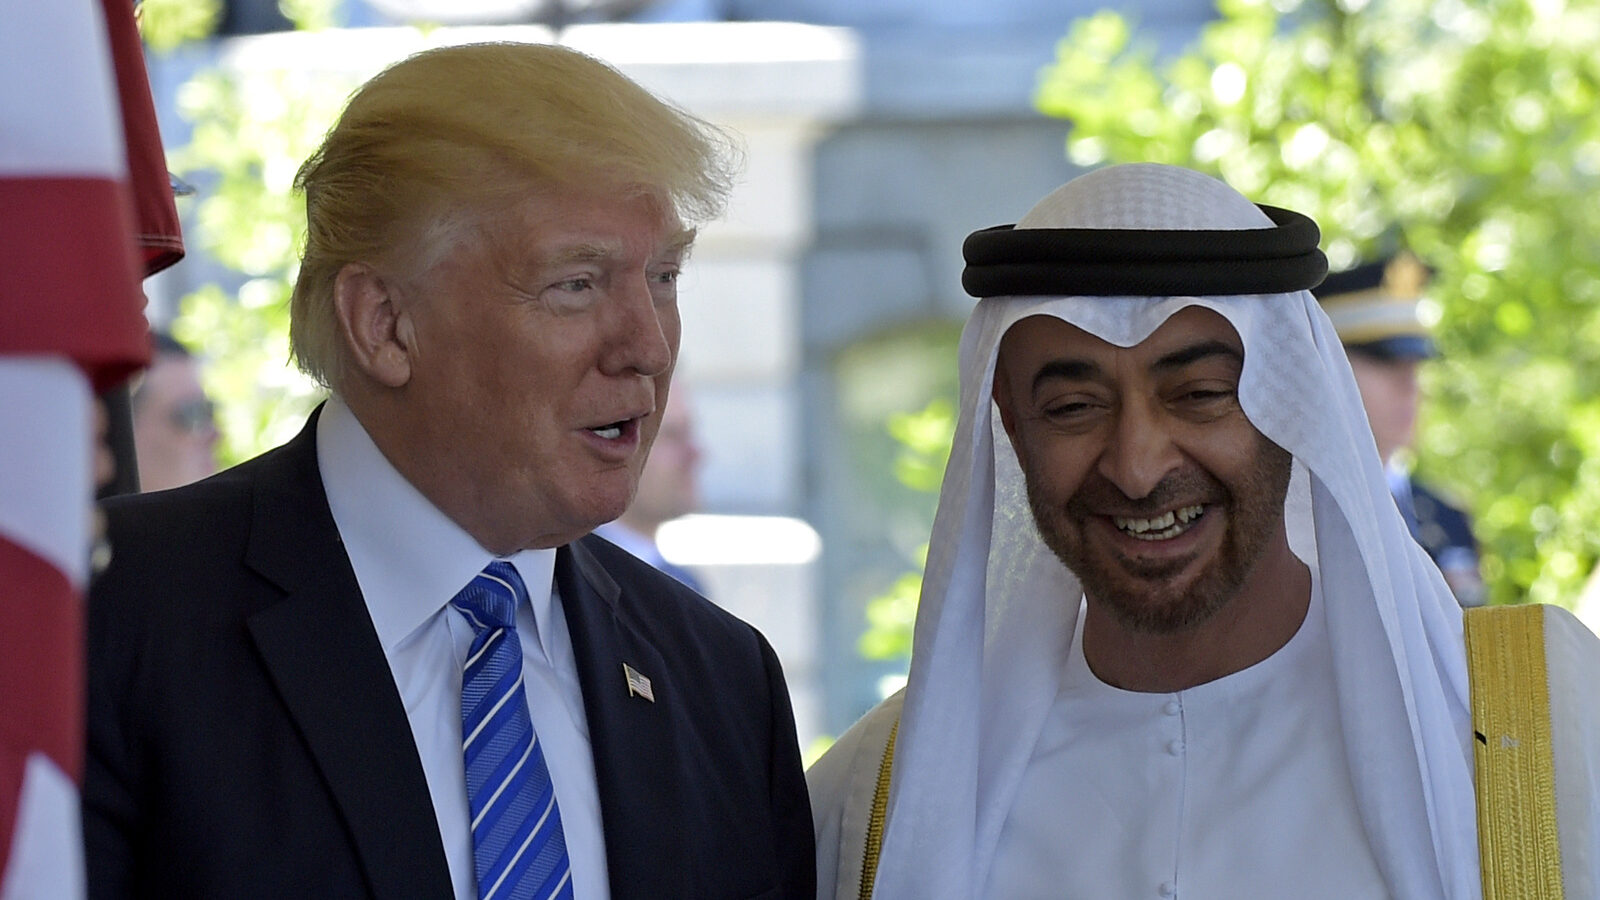 President Donald Trump welcomes Abu Dhabi's Crown Prince Sheikh Mohammed bin Zayed Al Nahyan to the White House in Washington,, May 15, 2017. (AP/Susan Walsh)